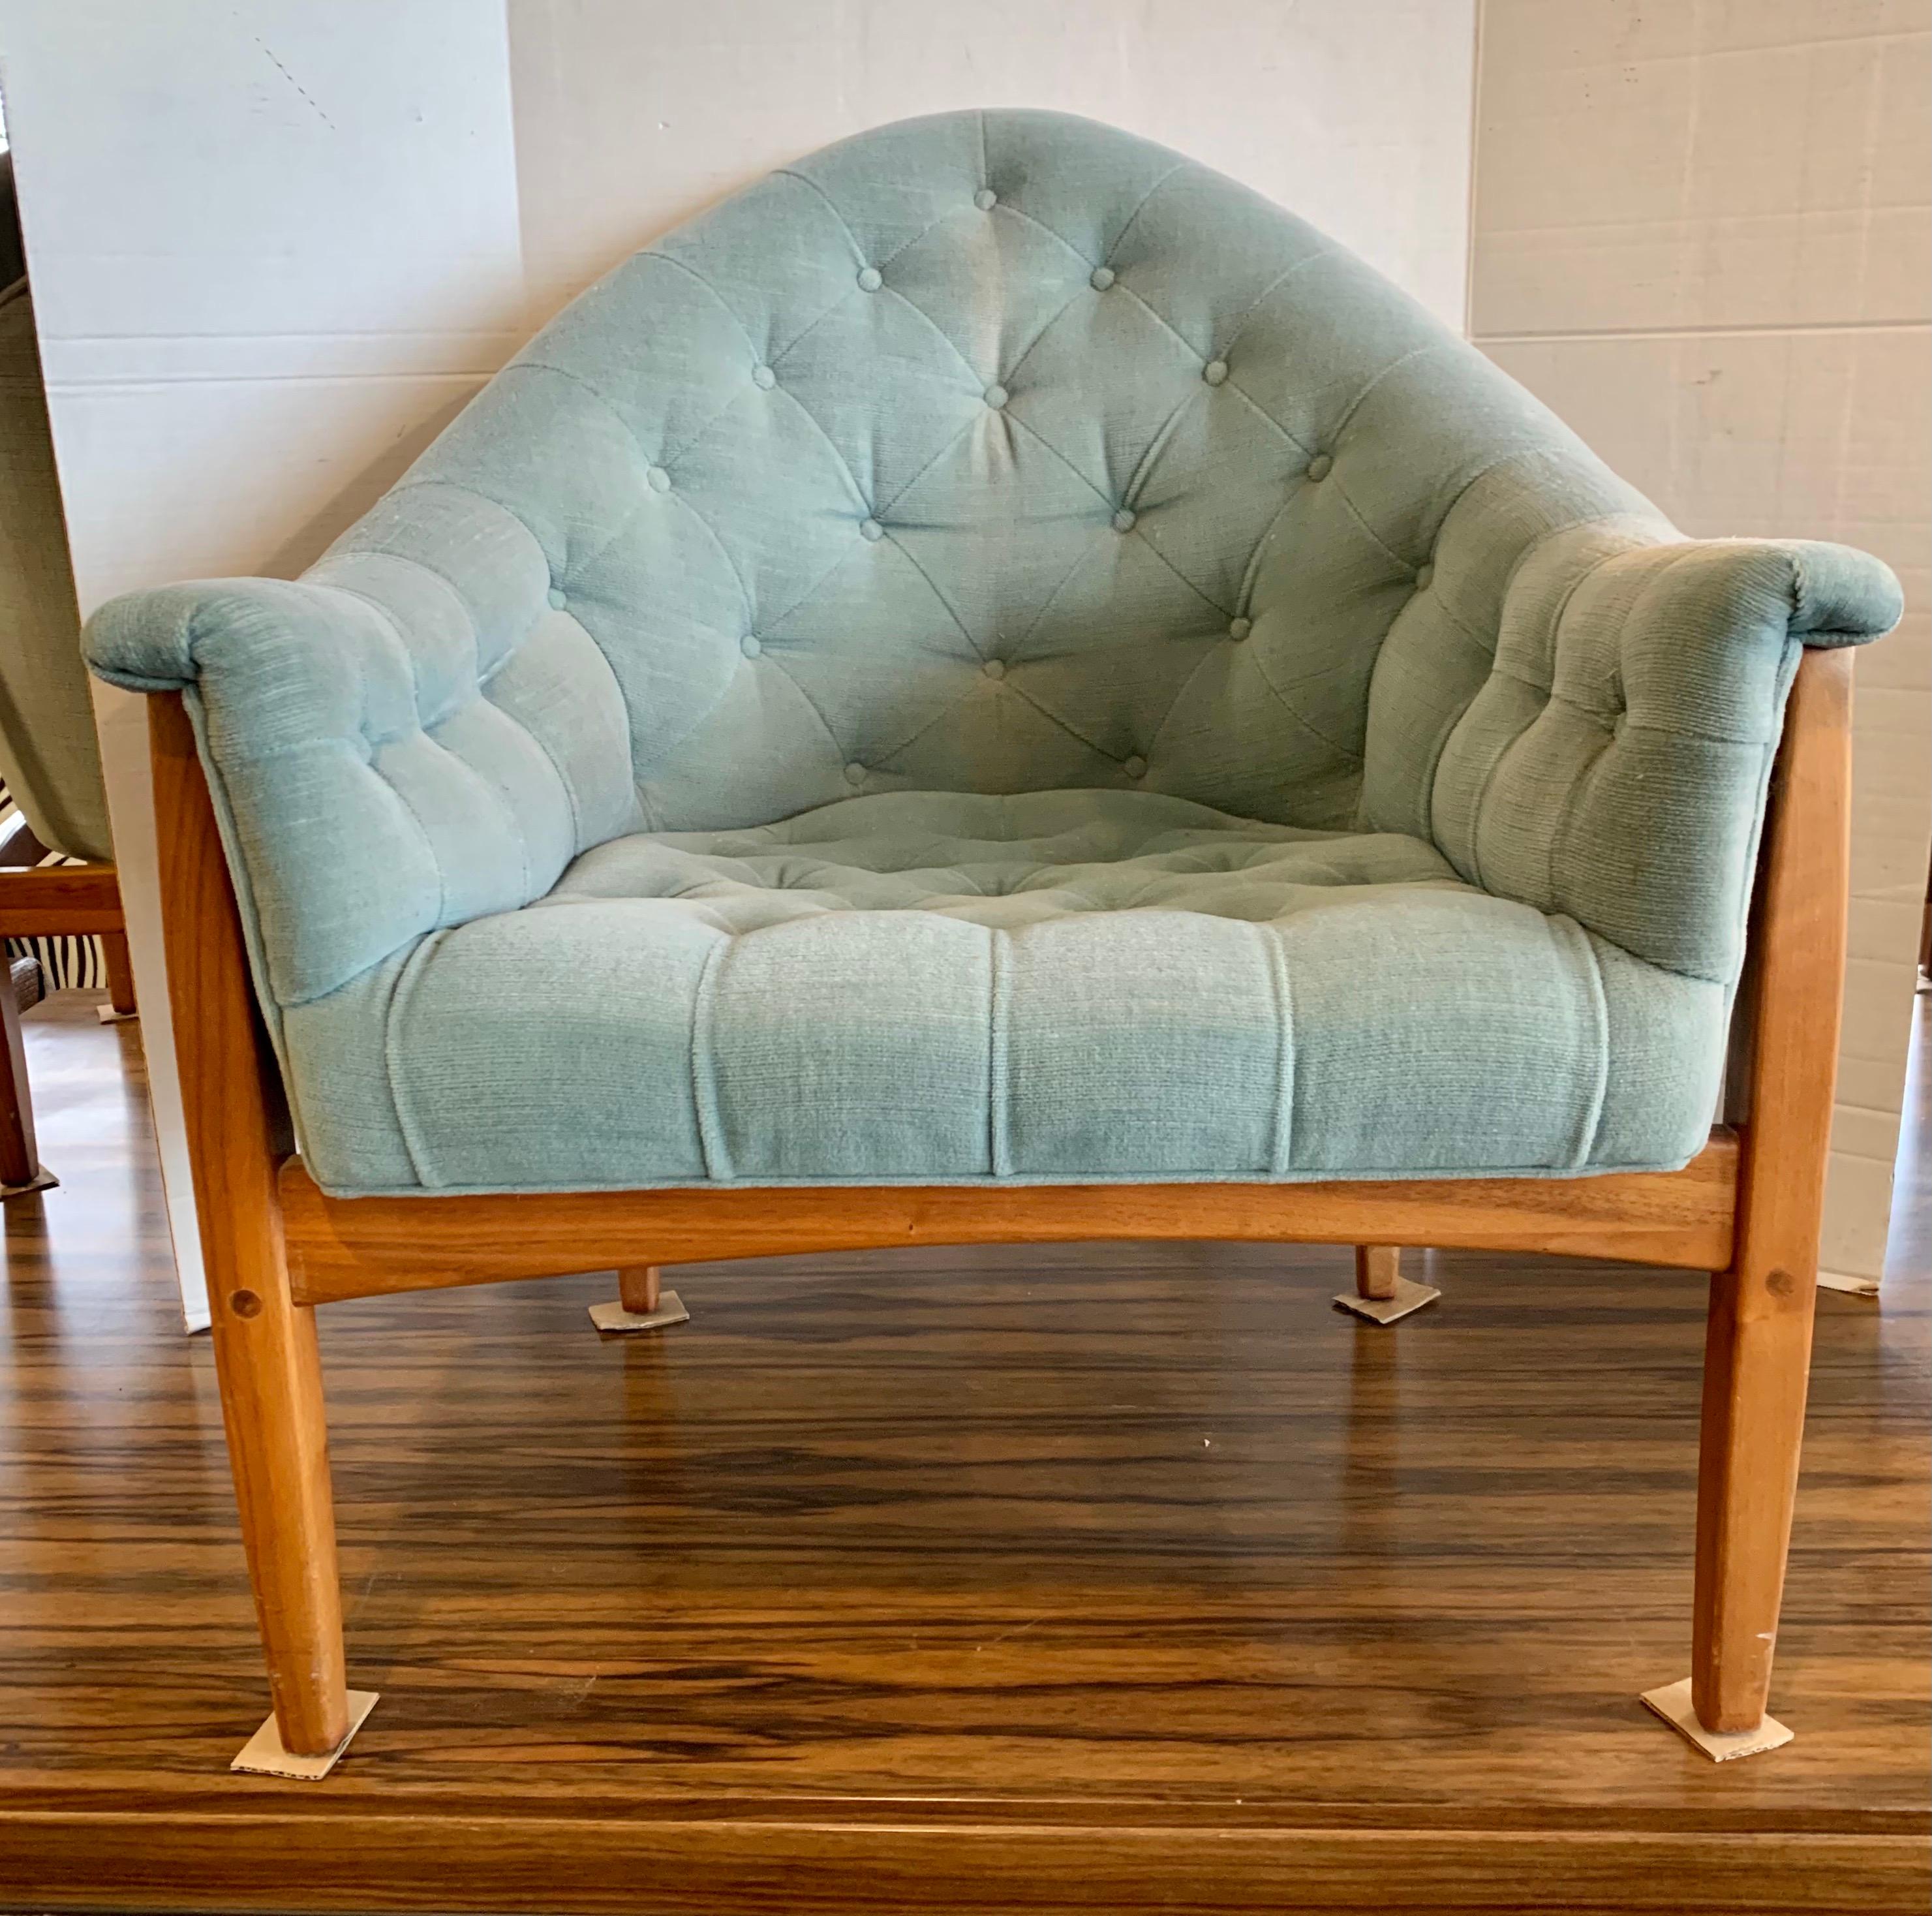 Set of four ultra coveted tufted velvet lounge chairs with exterior mounted mahogany frame by Milo Baughman for Thayer Coggin, circa 1965. All hallmarks are present and attached on photos. The frames are sturdy and magnificent.
We have less than